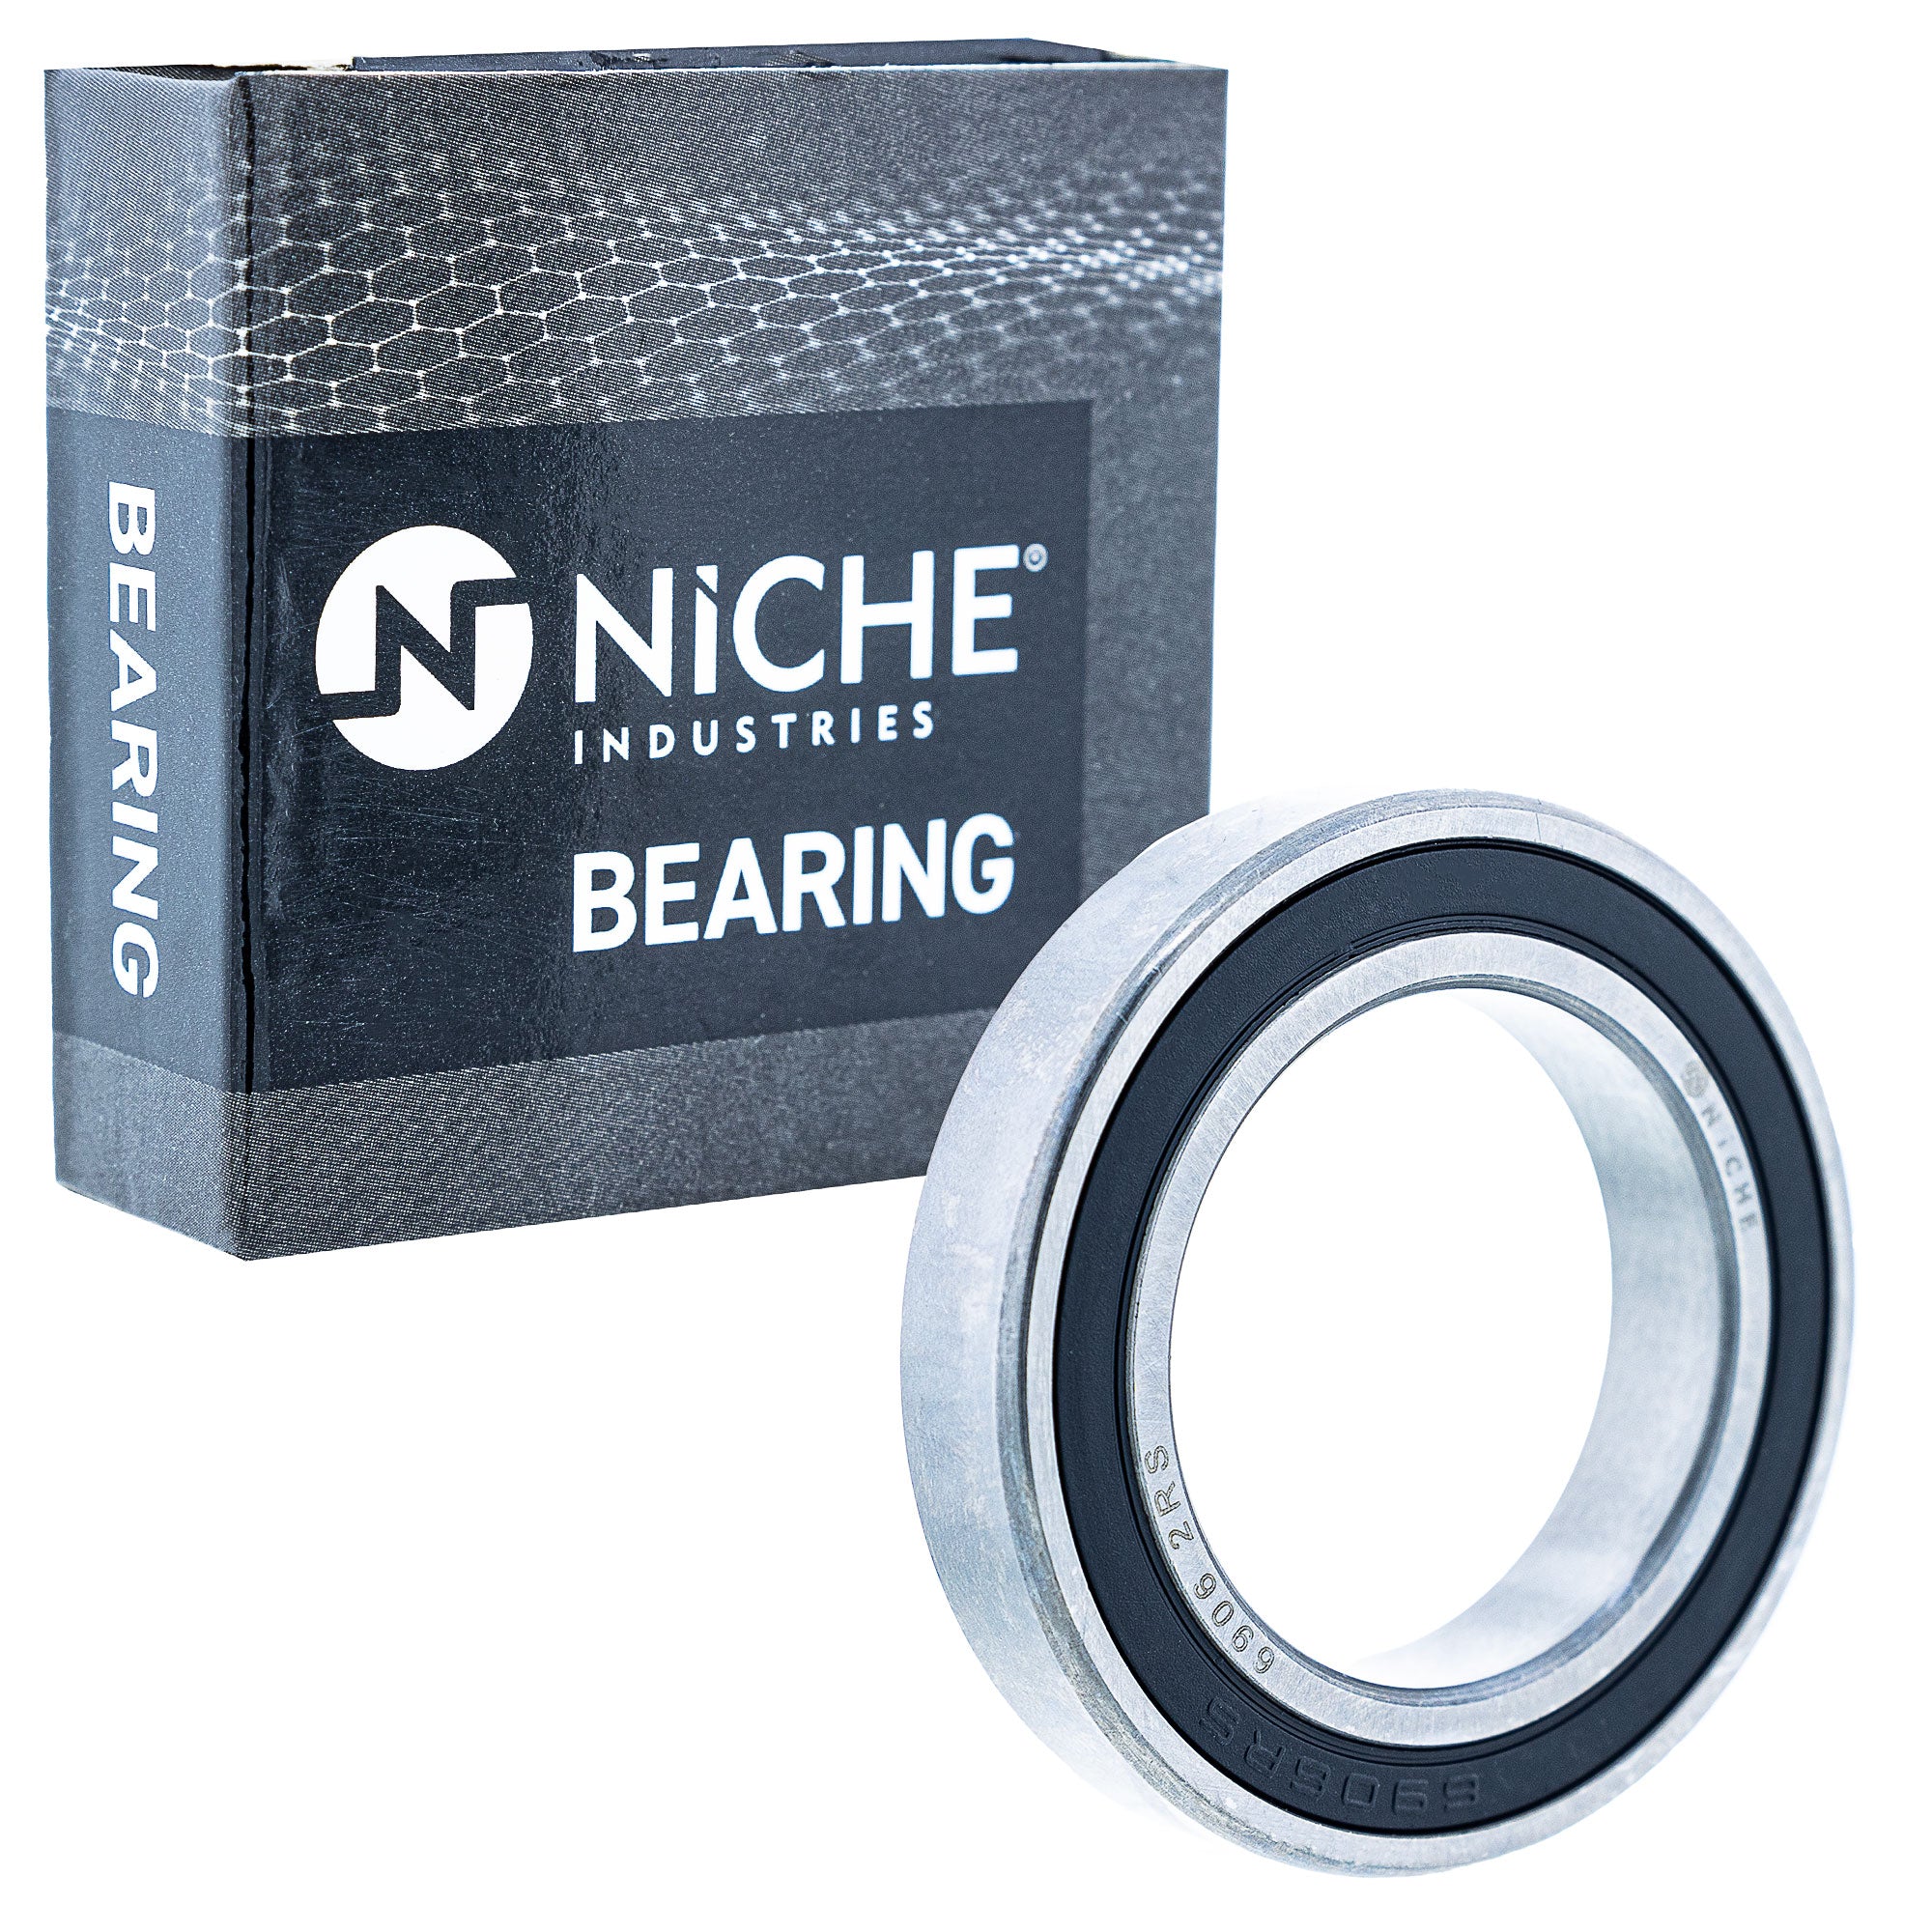 NICHE 519-CBB2250R Bearing 10-Pack for zOTHER